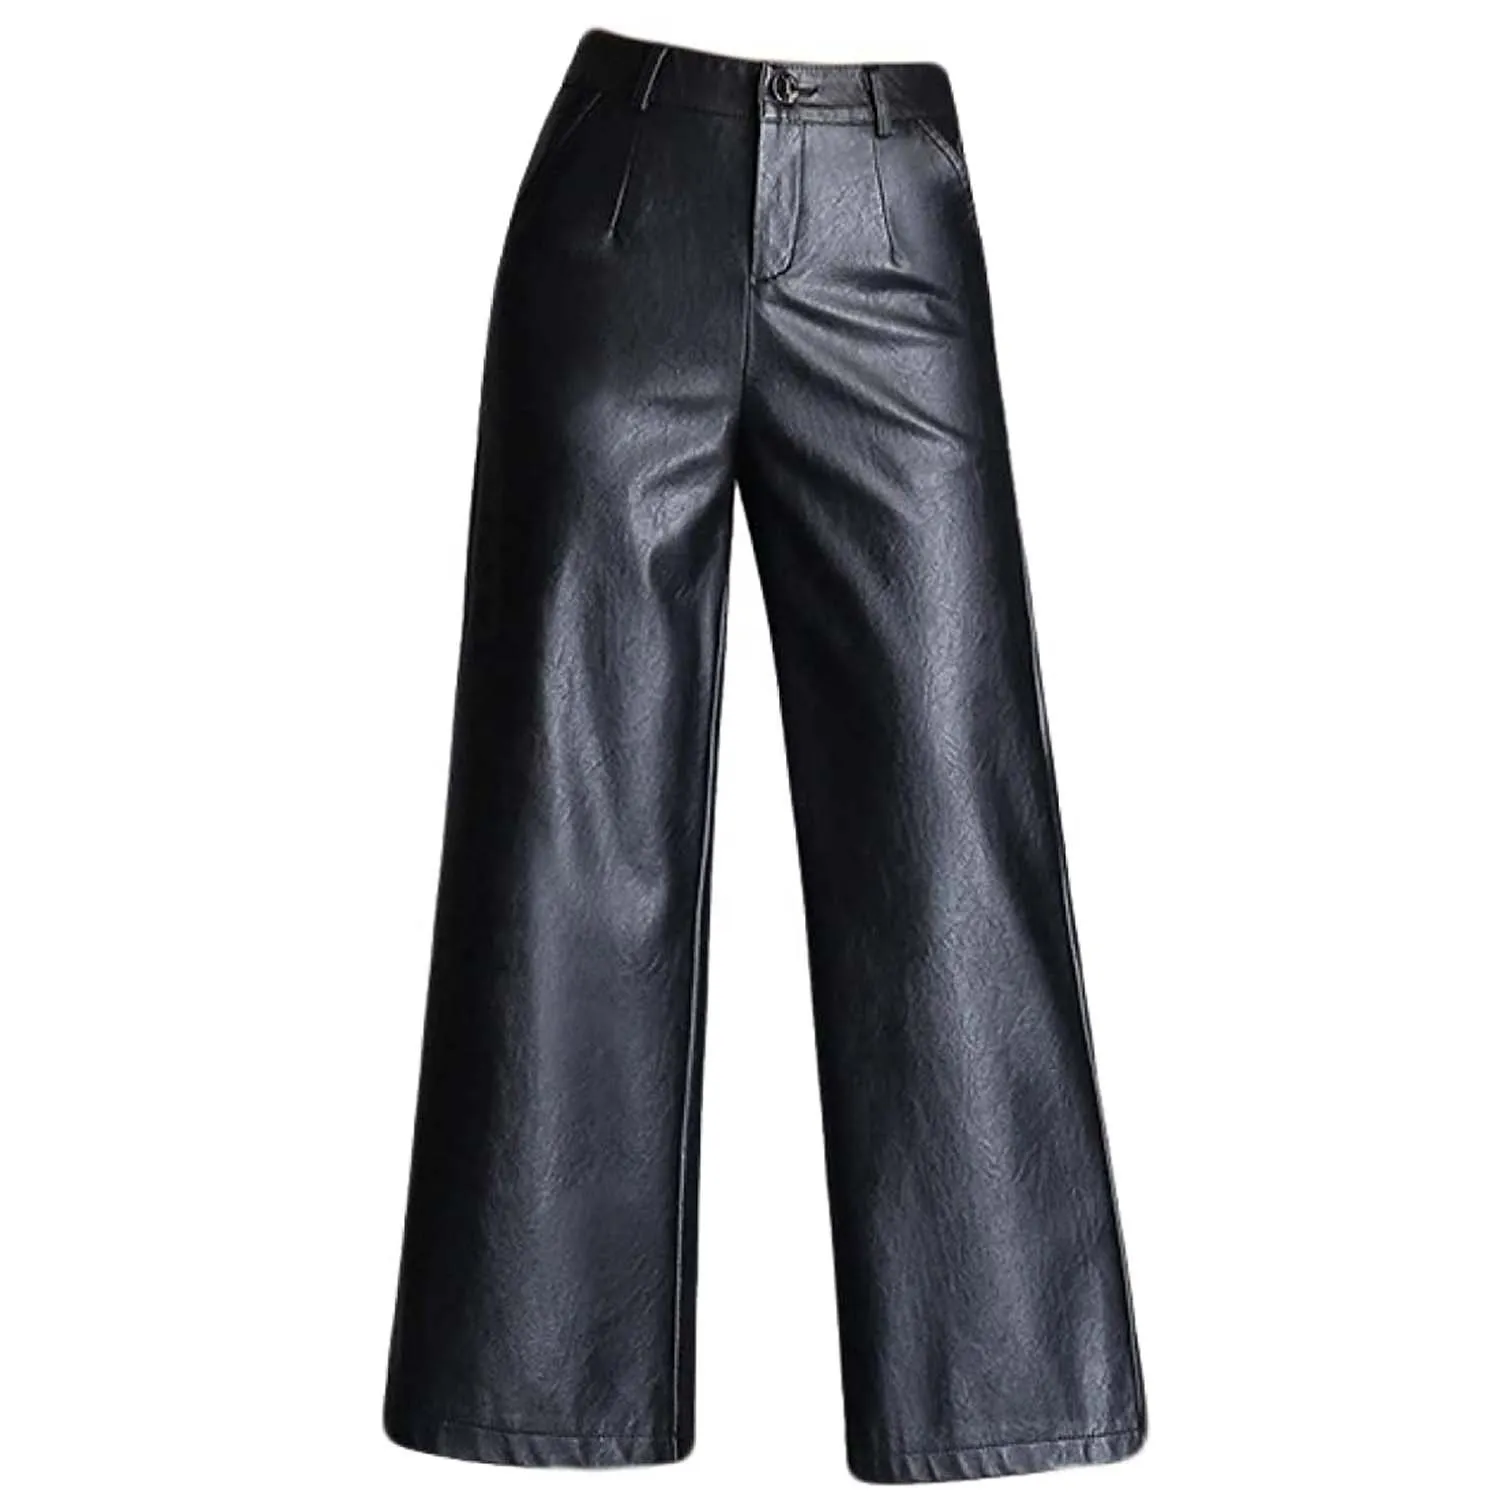 New style streetwear PU Trousers Fall Winter Fashion Clothing High Waist Thick Solid Black Leather Pants Women wholesale rate